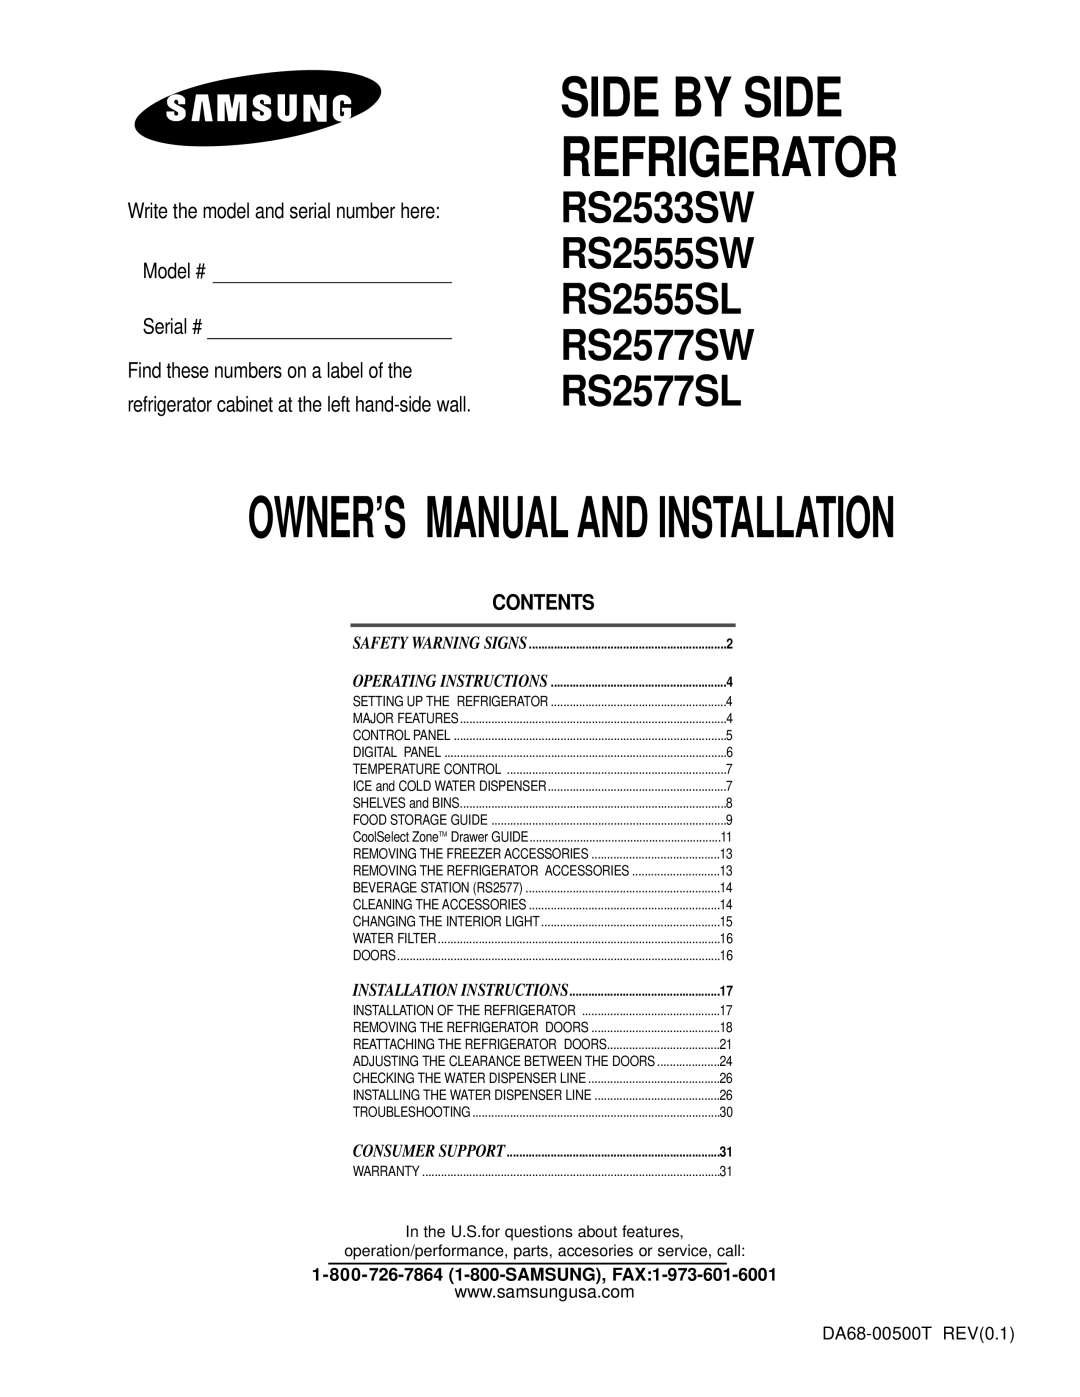 Samsung RS2533SW owner manual Write the model and serial number here Model # Serial #, Contents, RS2577SL 